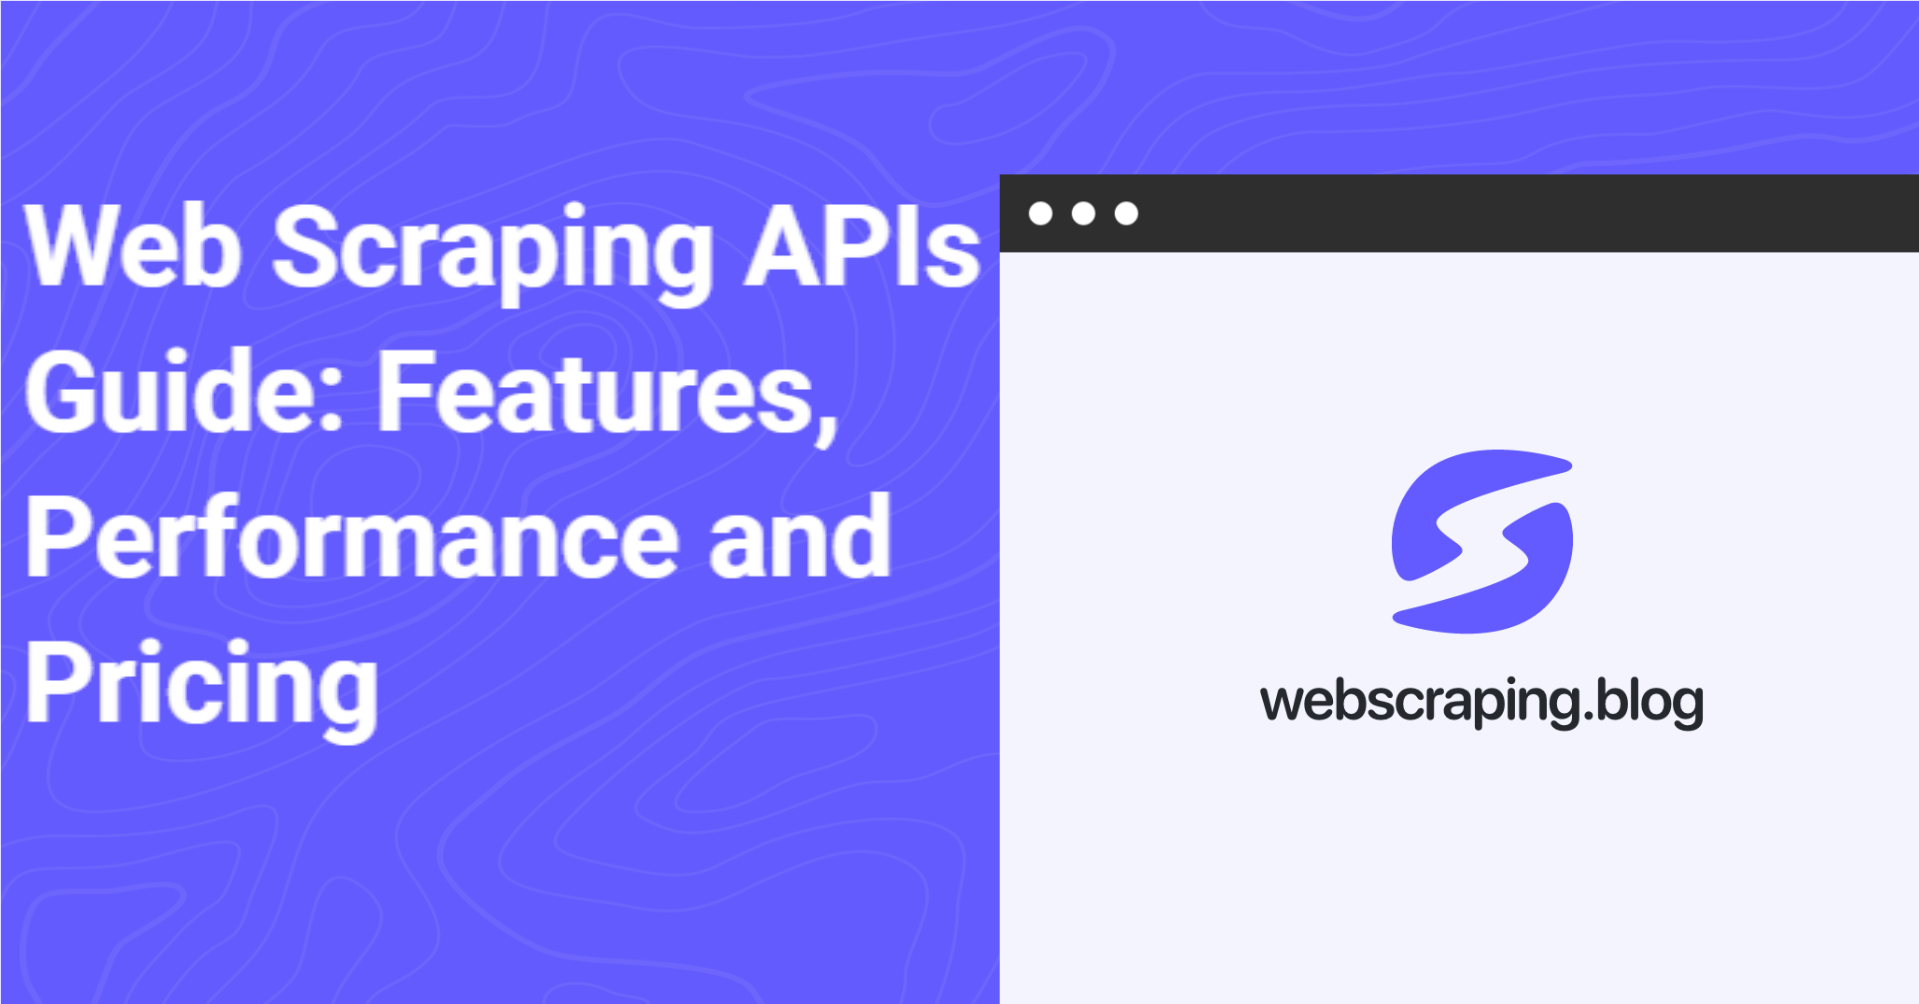 the cover of "Web Scraping APIs Guide" blog post